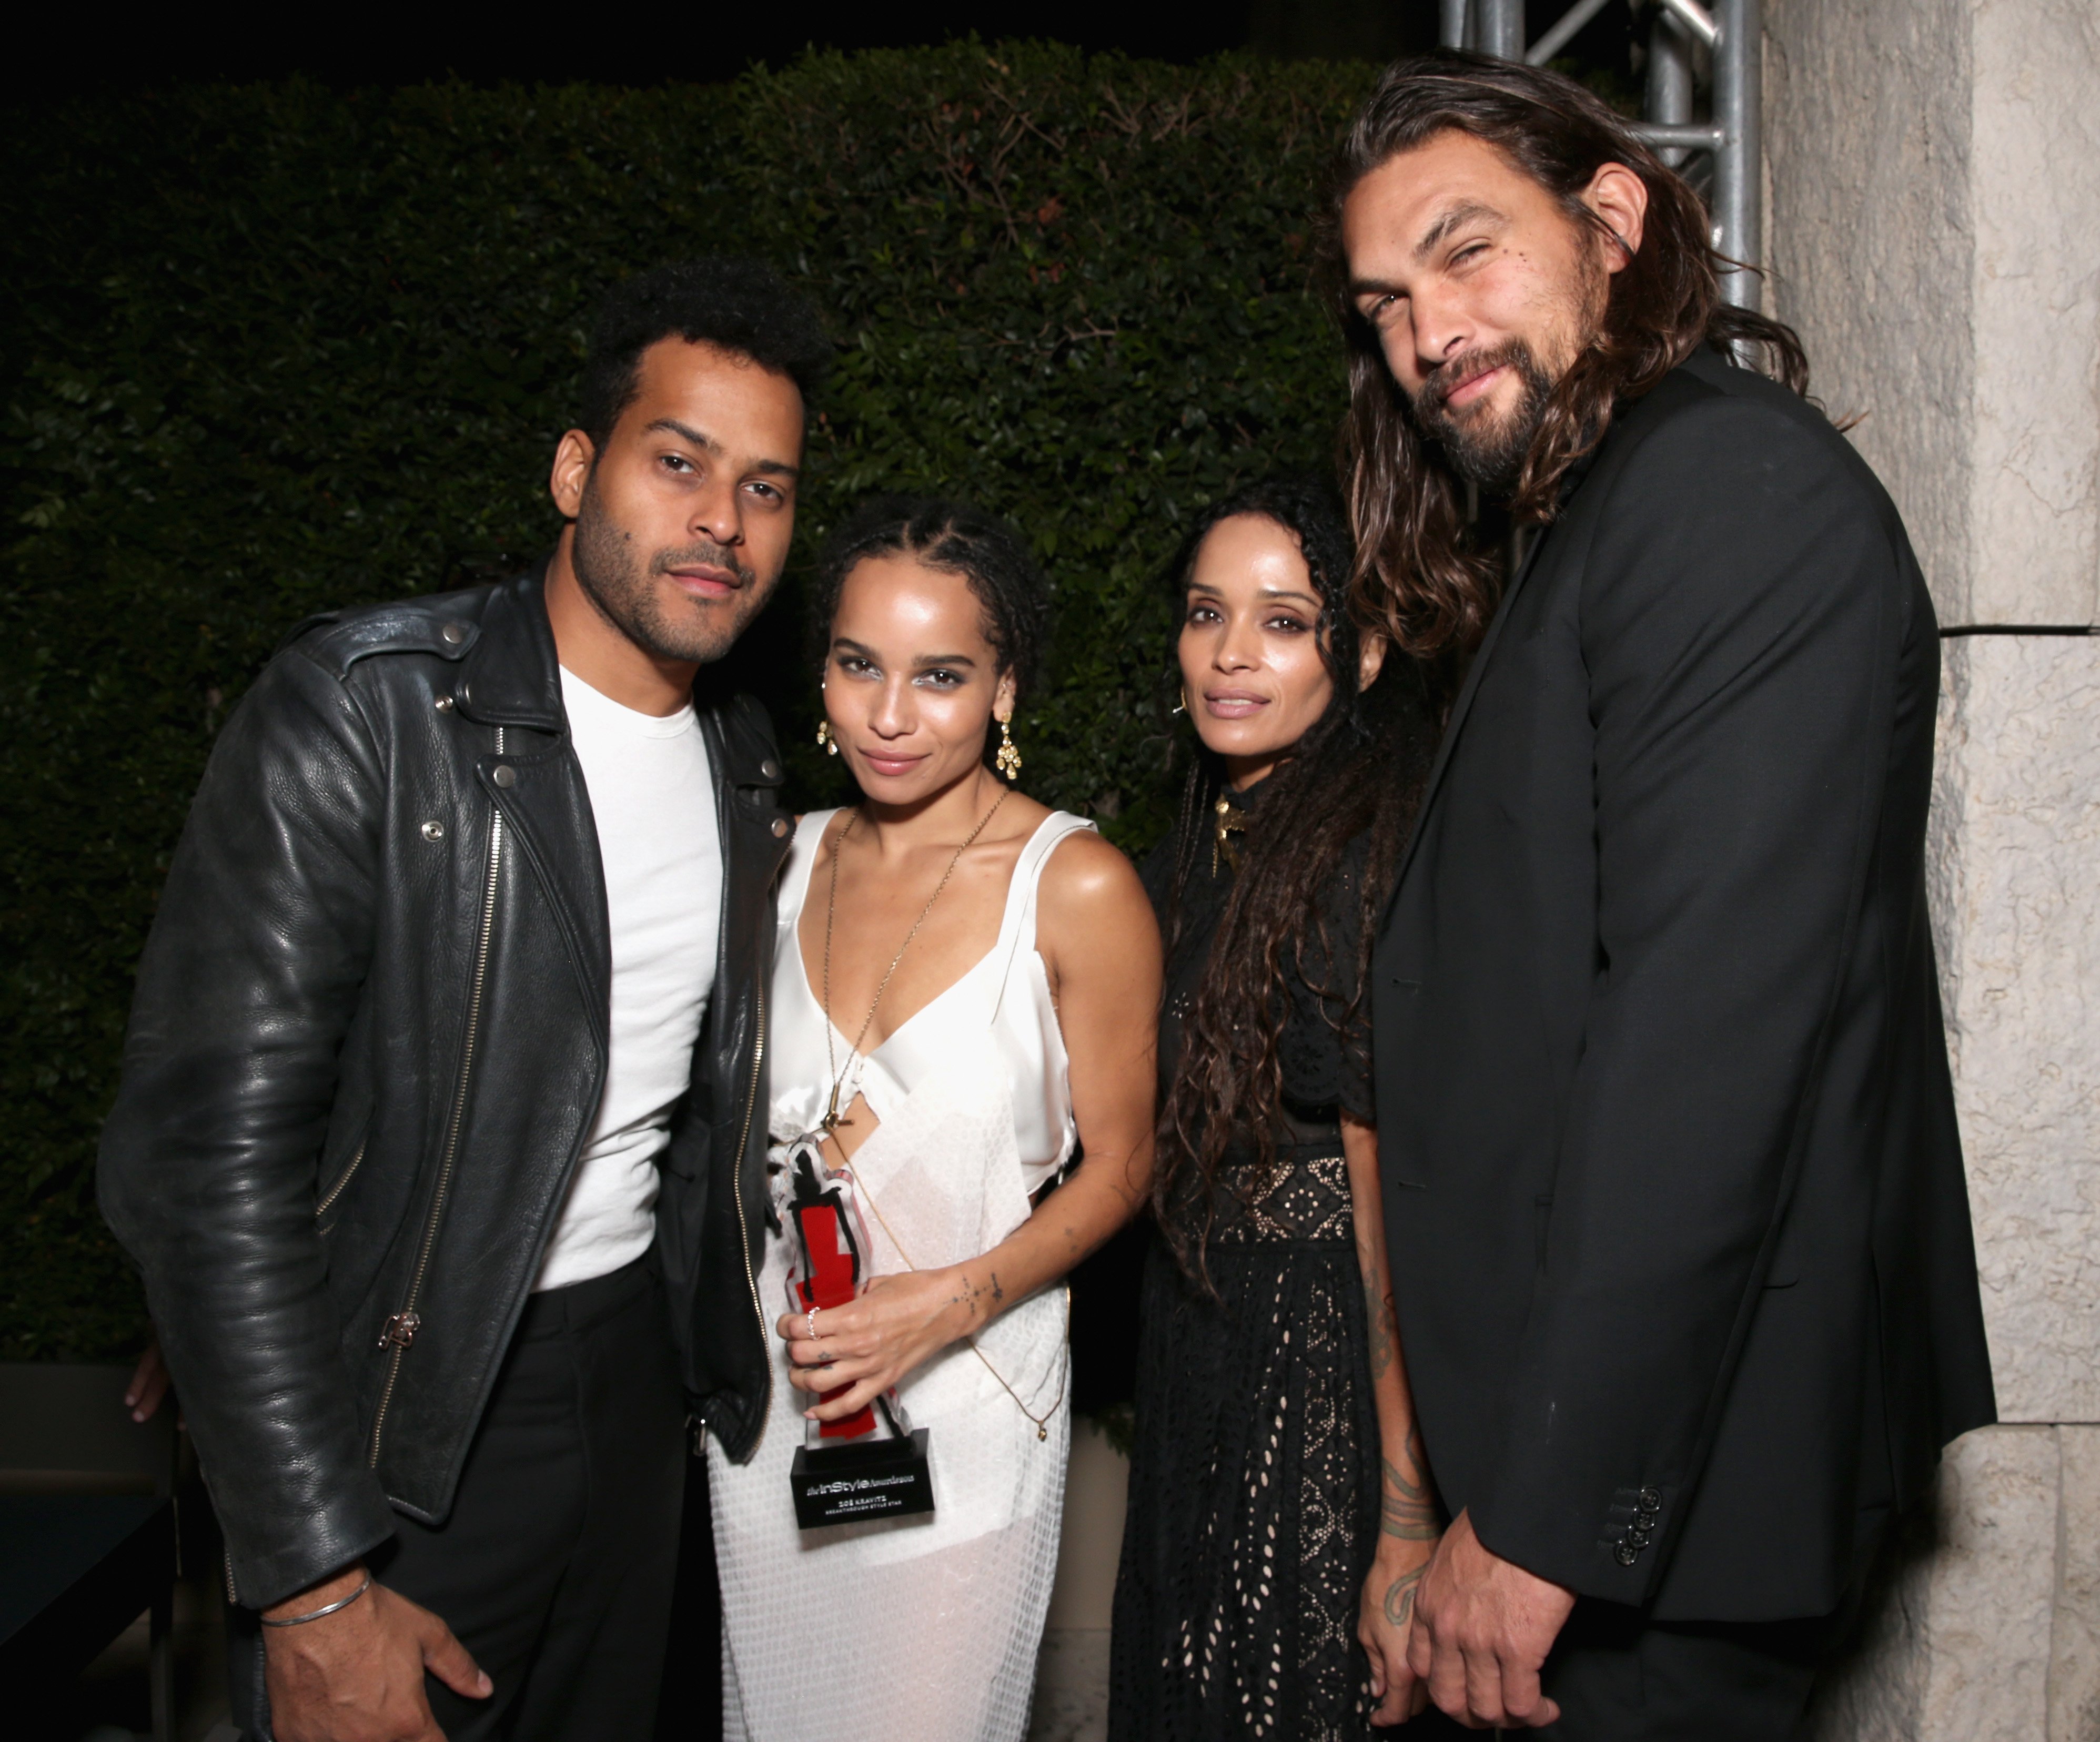 (L-R) Singer Twin Shadow, Zoë Kravitz,  Lisa Bonet & Jason Momoa at the InStyle Awards on Oct. 26, 2015 in California | Photo: Getty Images